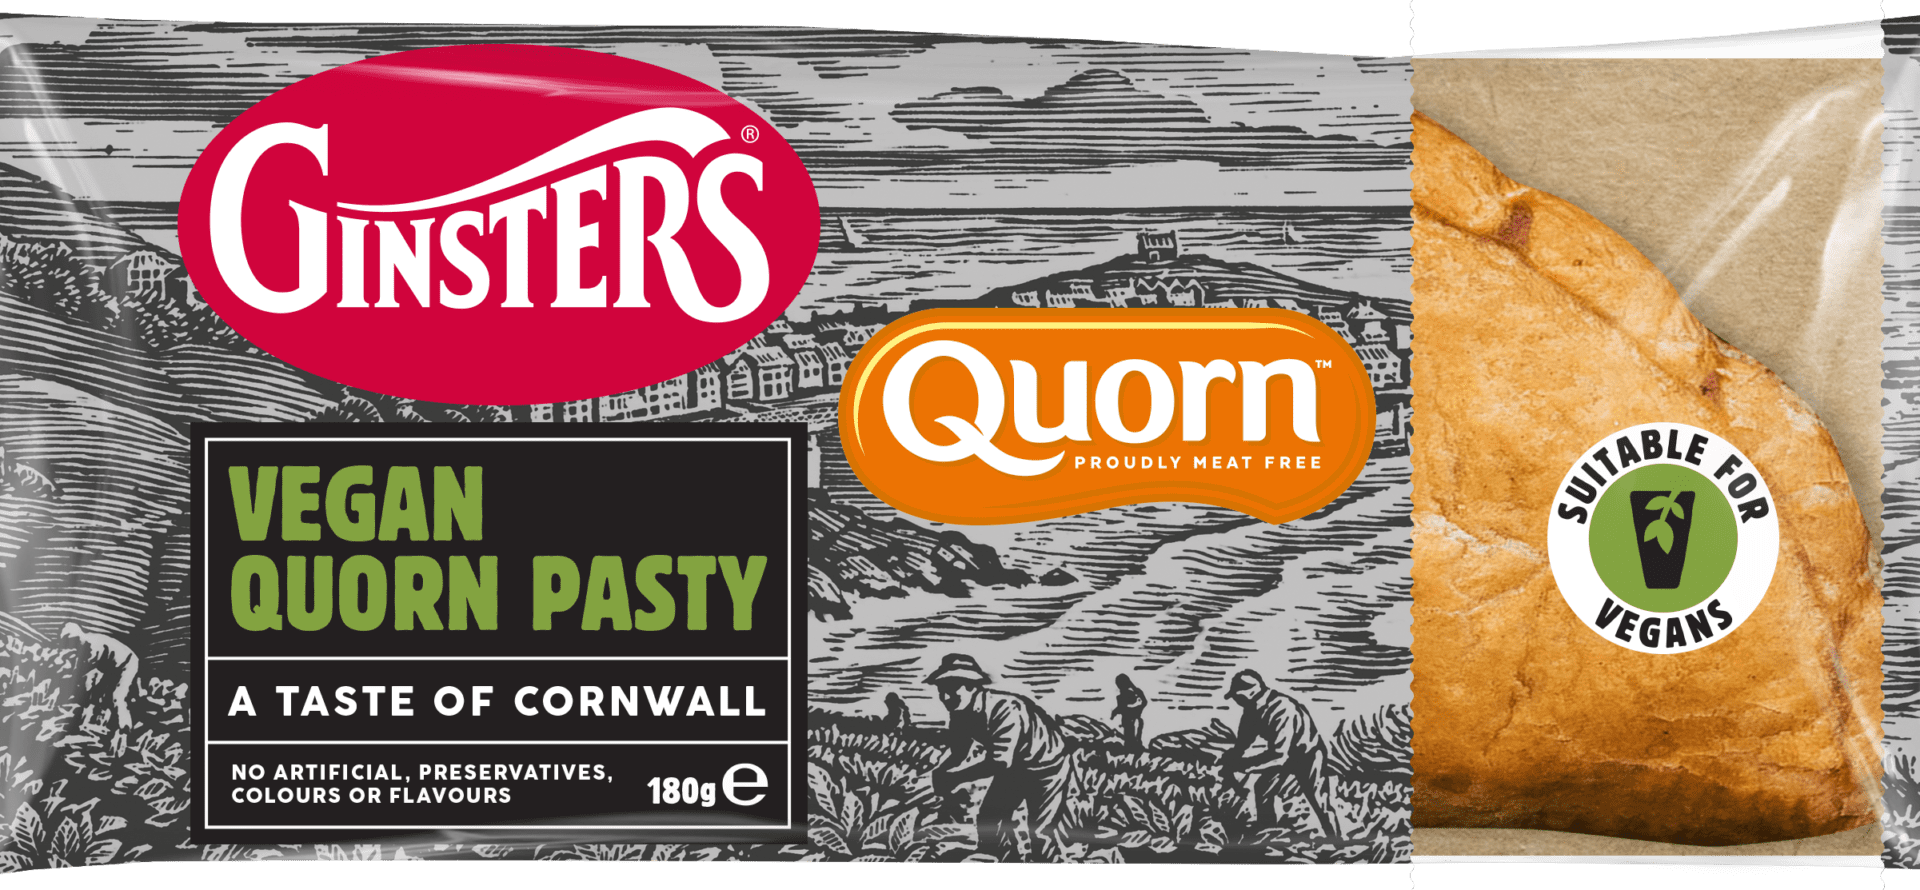 Ginsters Vegan Quorn Pasty